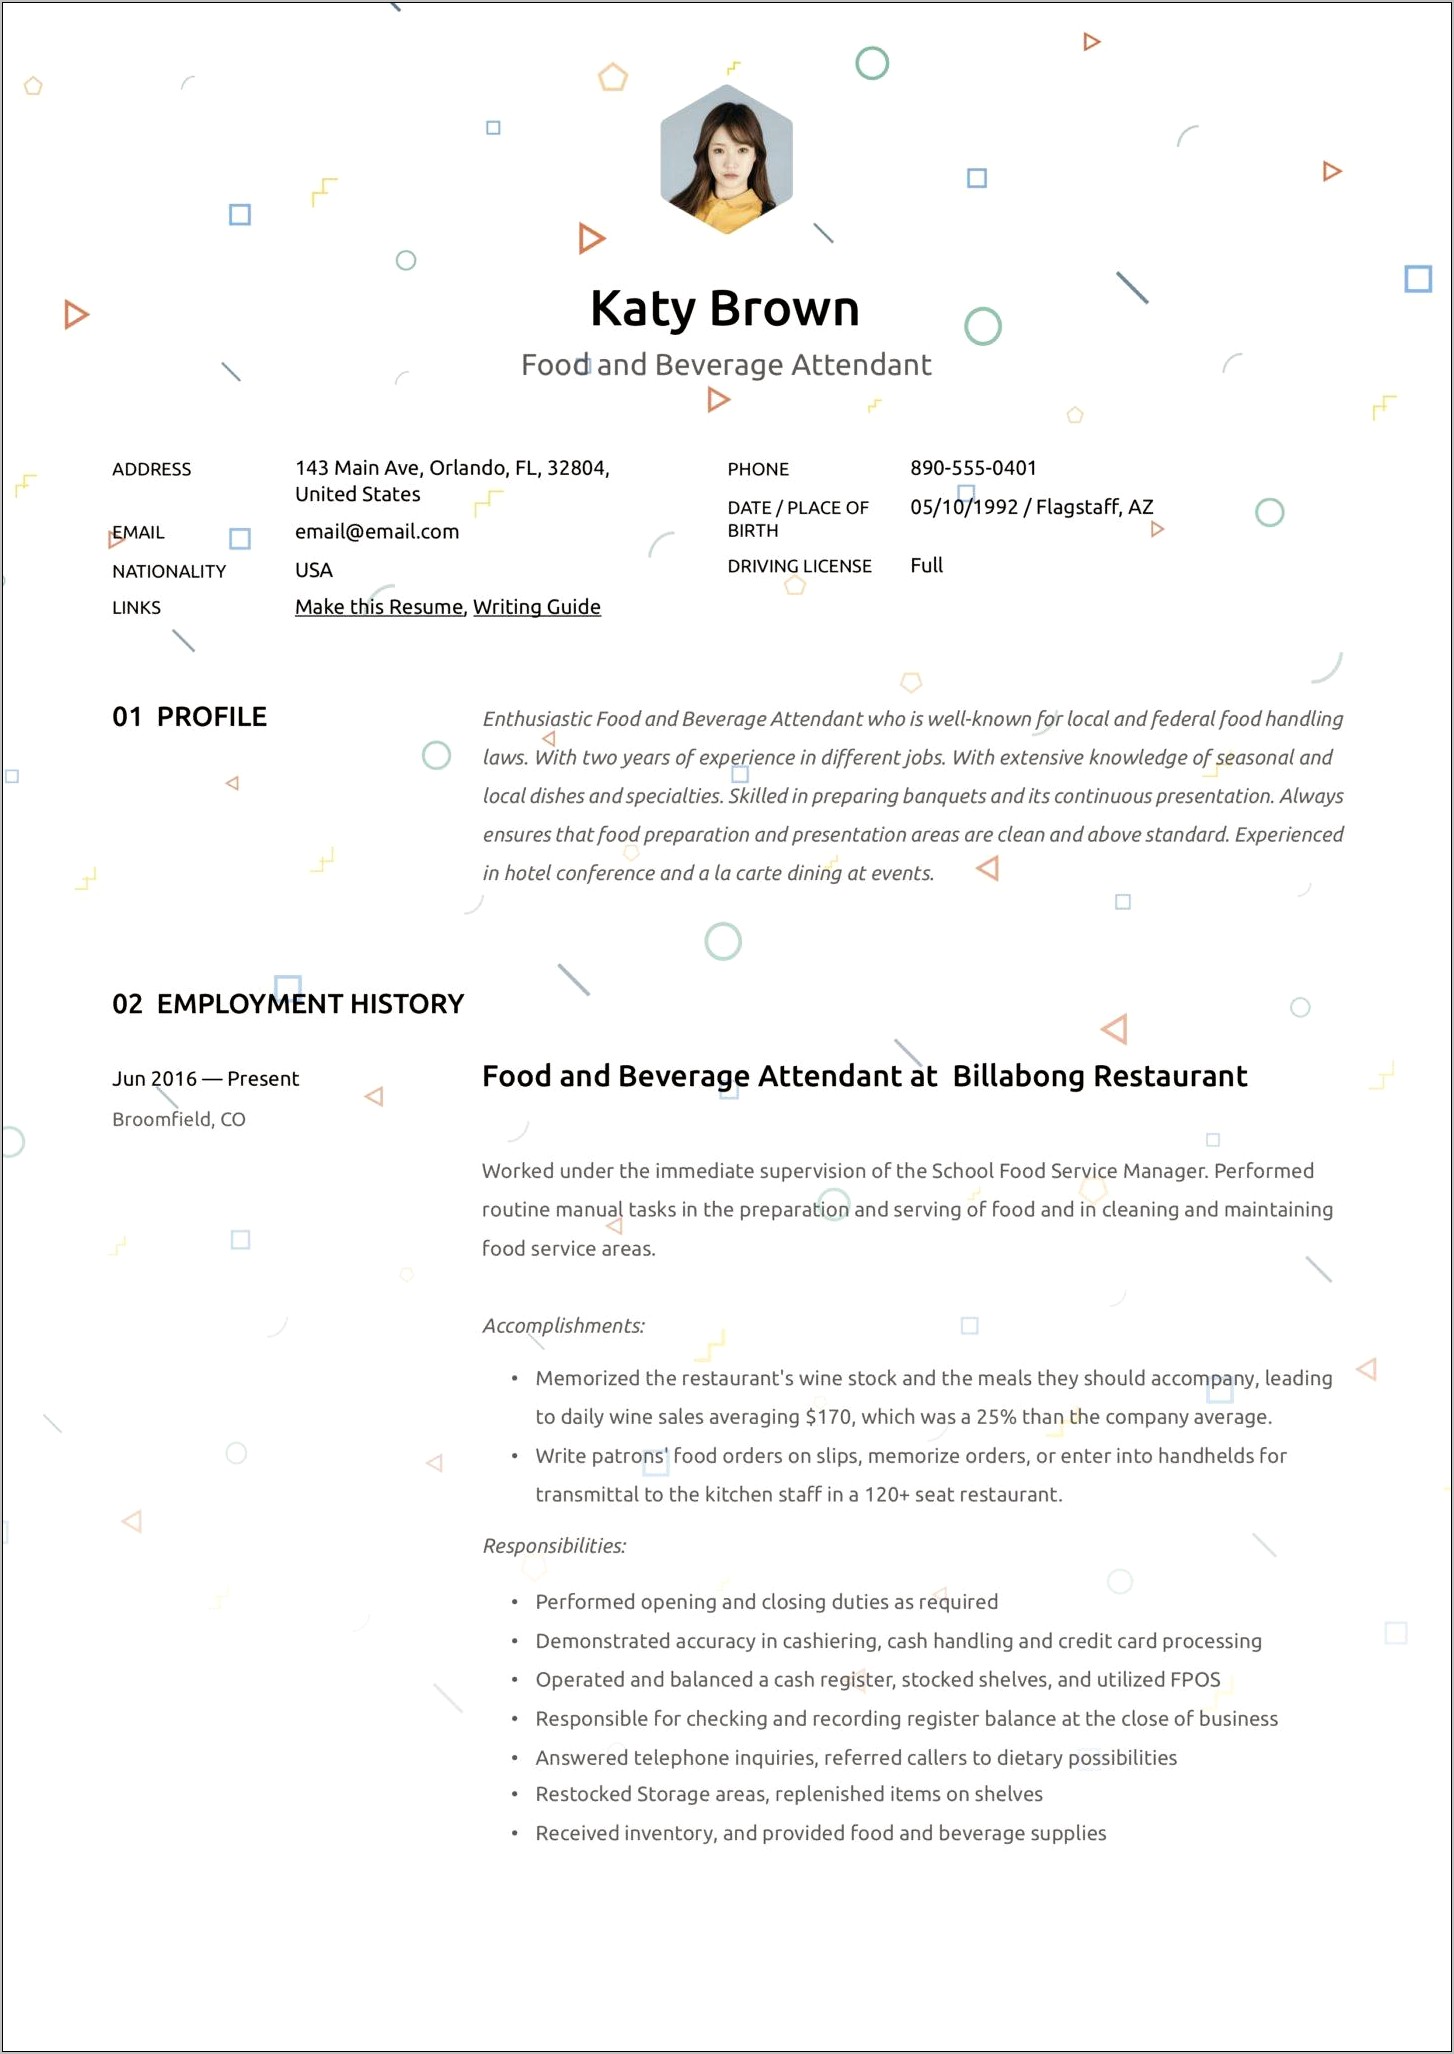 Resume Objective Sample For Hospitality Industry